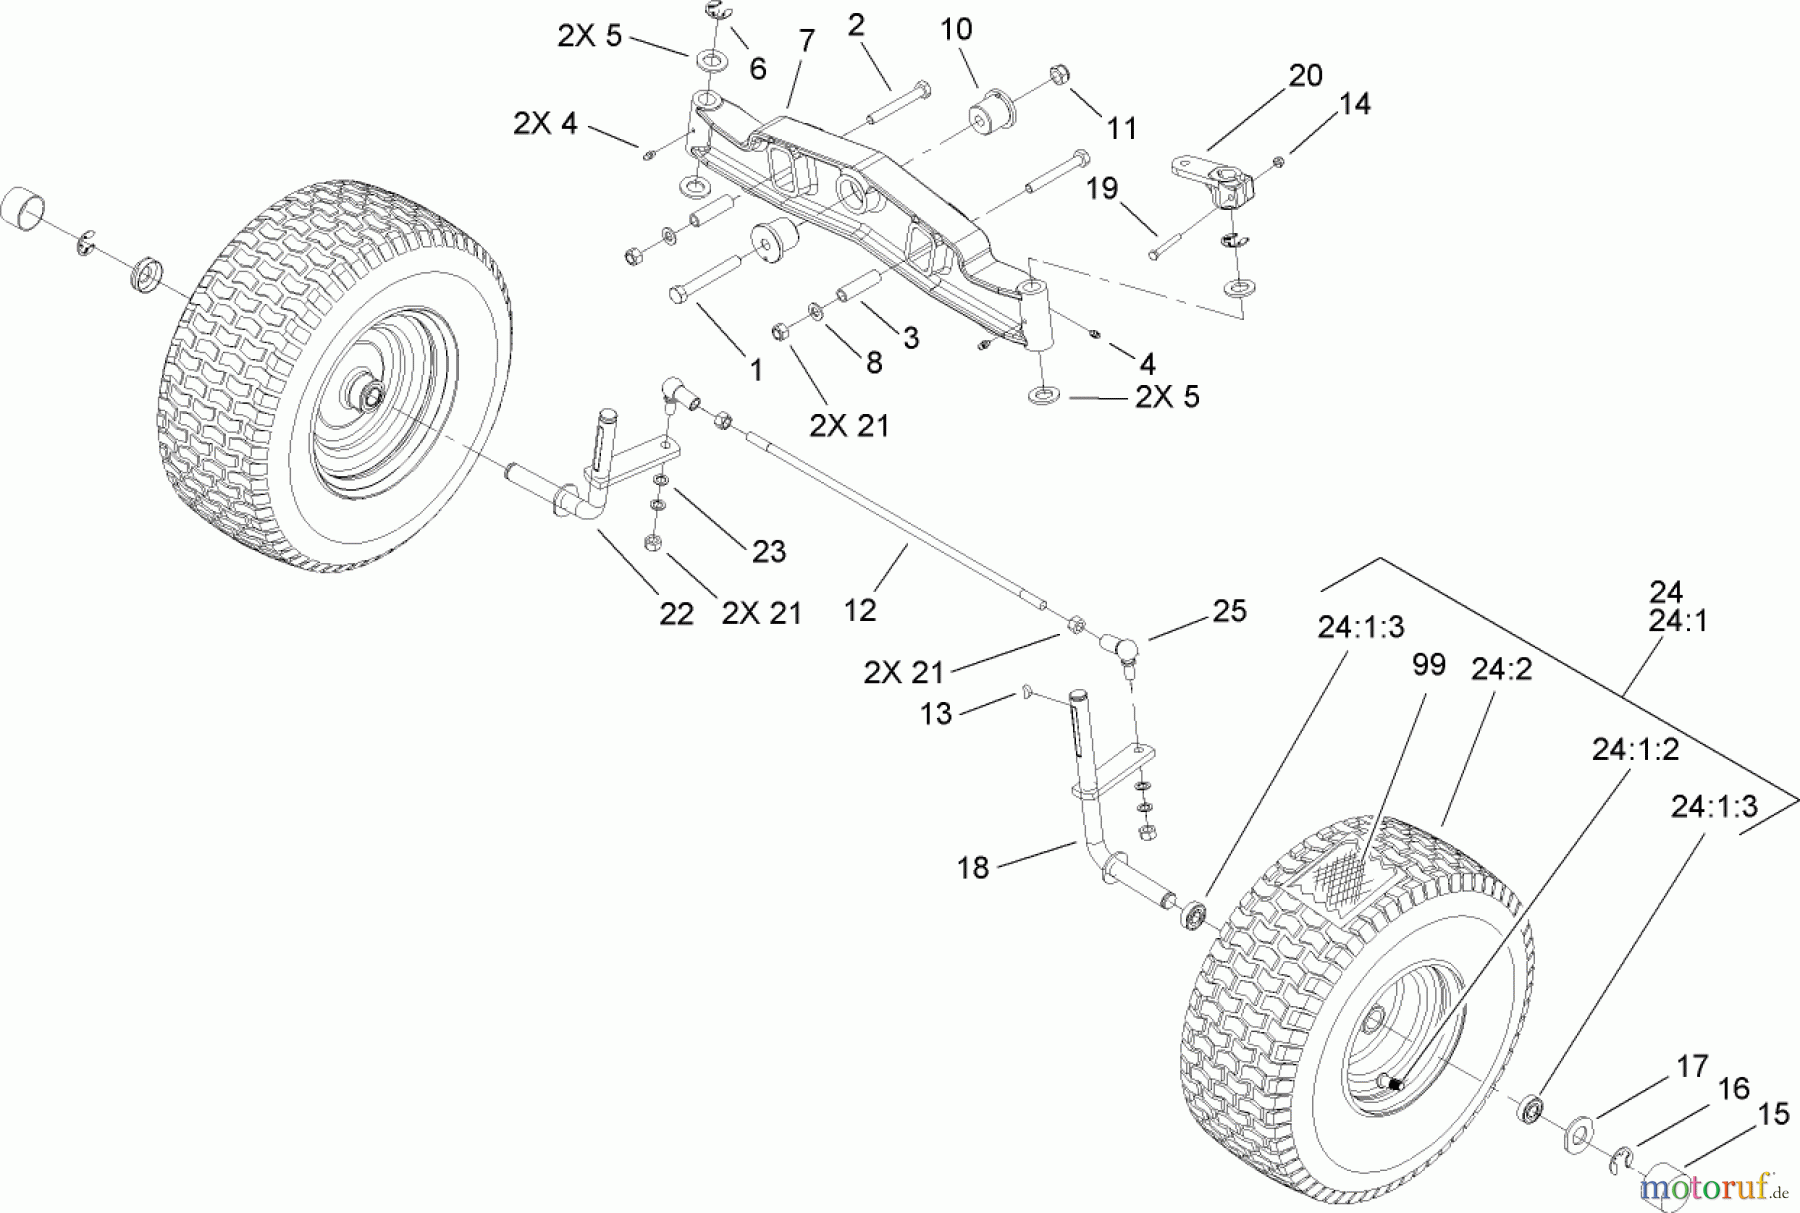  Toro Neu Mowers, Lawn & Garden Tractor Seite 1 74573 (DH 200) - Toro DH 200 Lawn Tractor, 2007 (270000001-270999999) FRONT AXLE ASSEMBLY